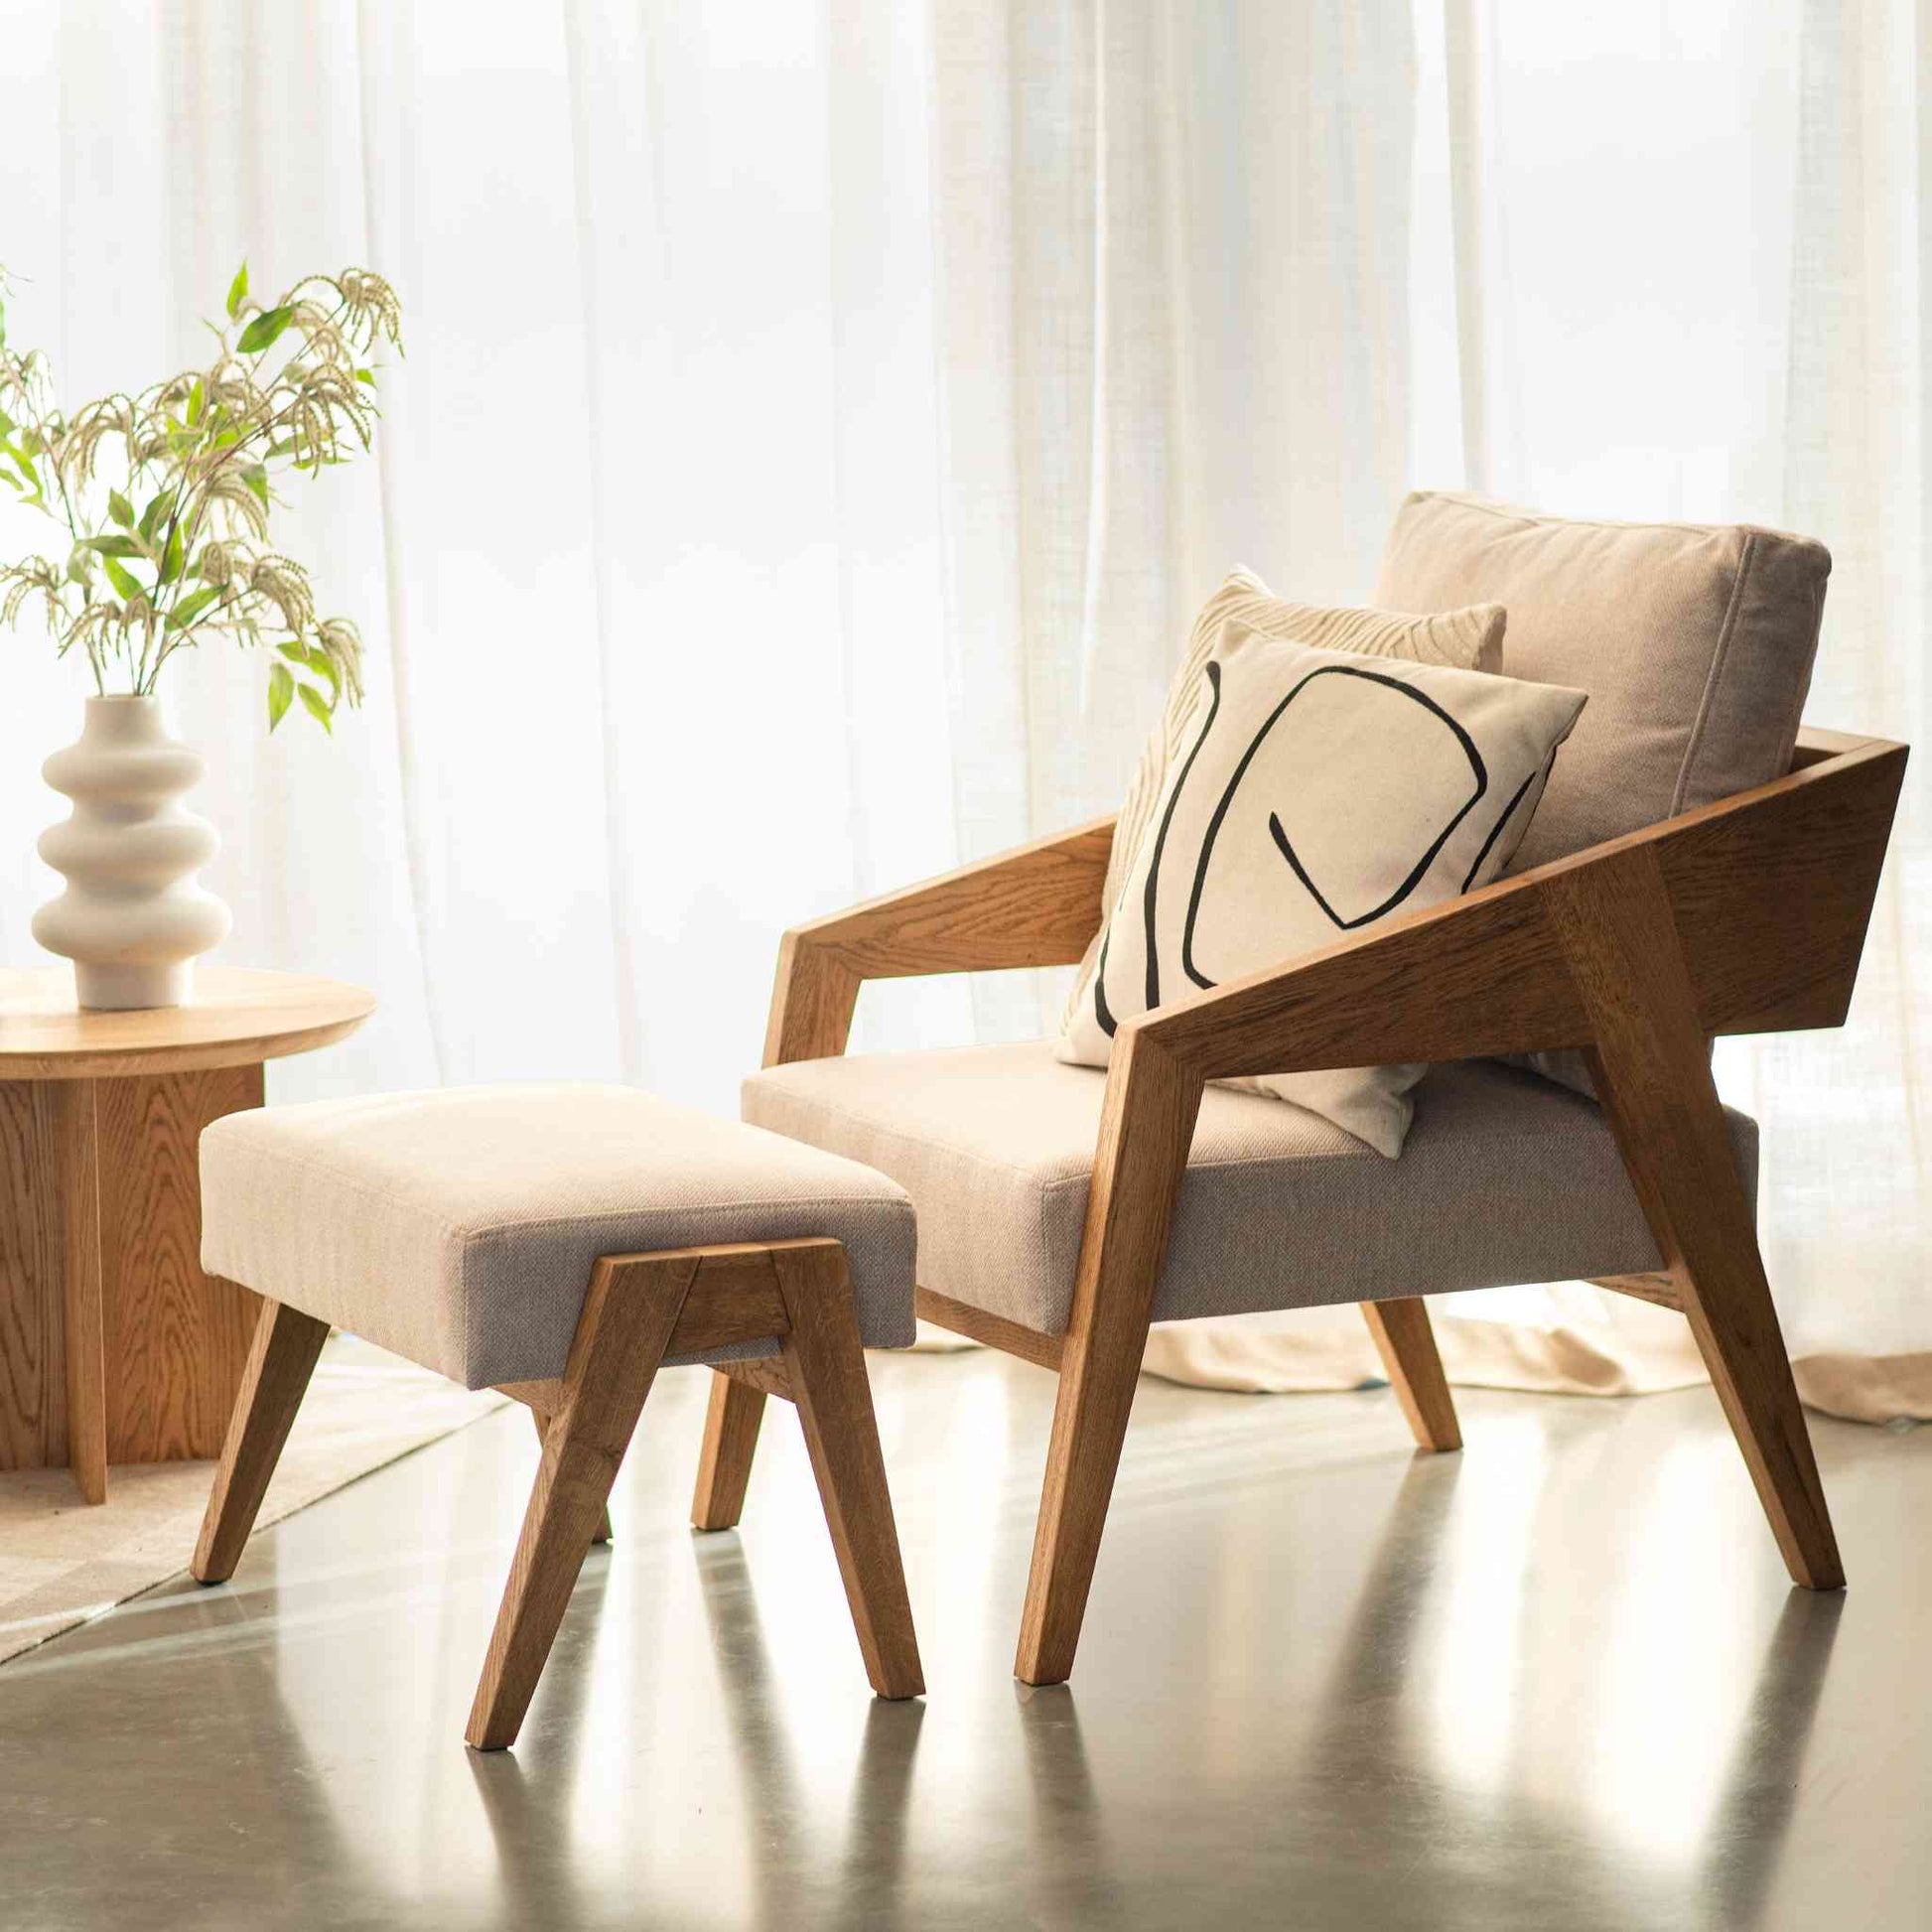 ÉTAUDORÉ Parsenn Armchair and Footrest in solid oak wood with high quality cream color upholstery